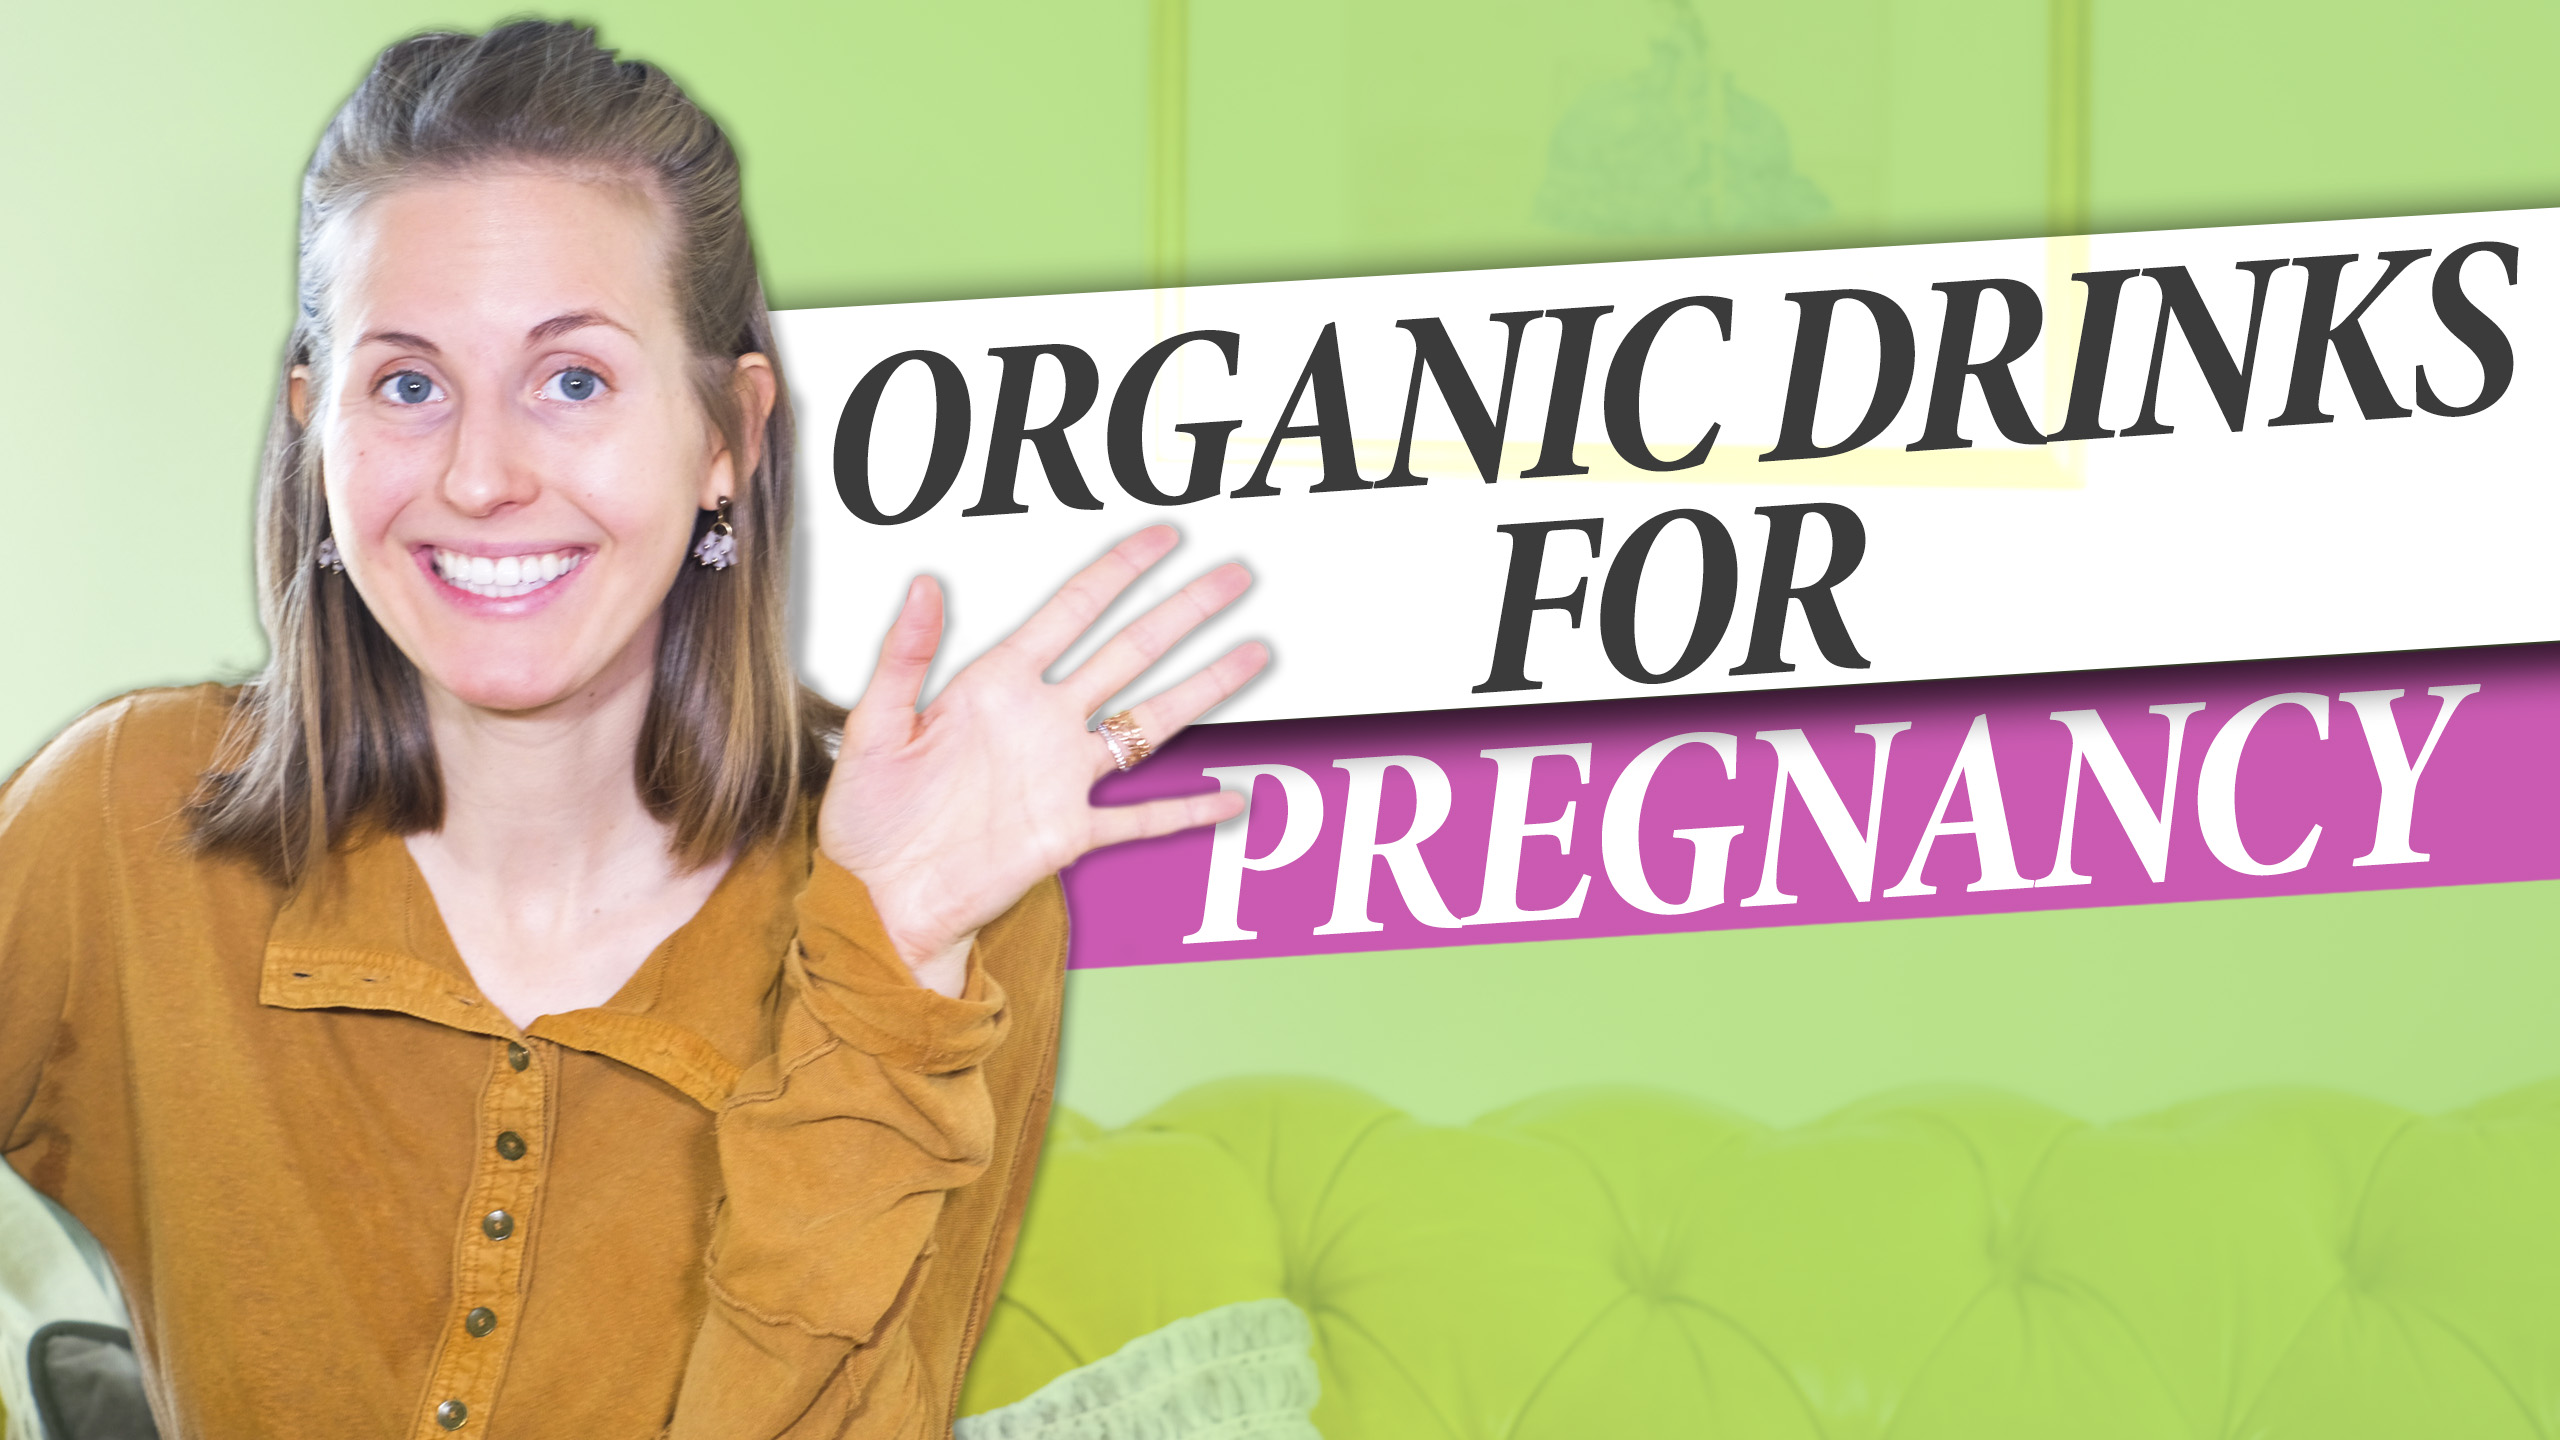 5 organic drinks to have a healthy pregnancy